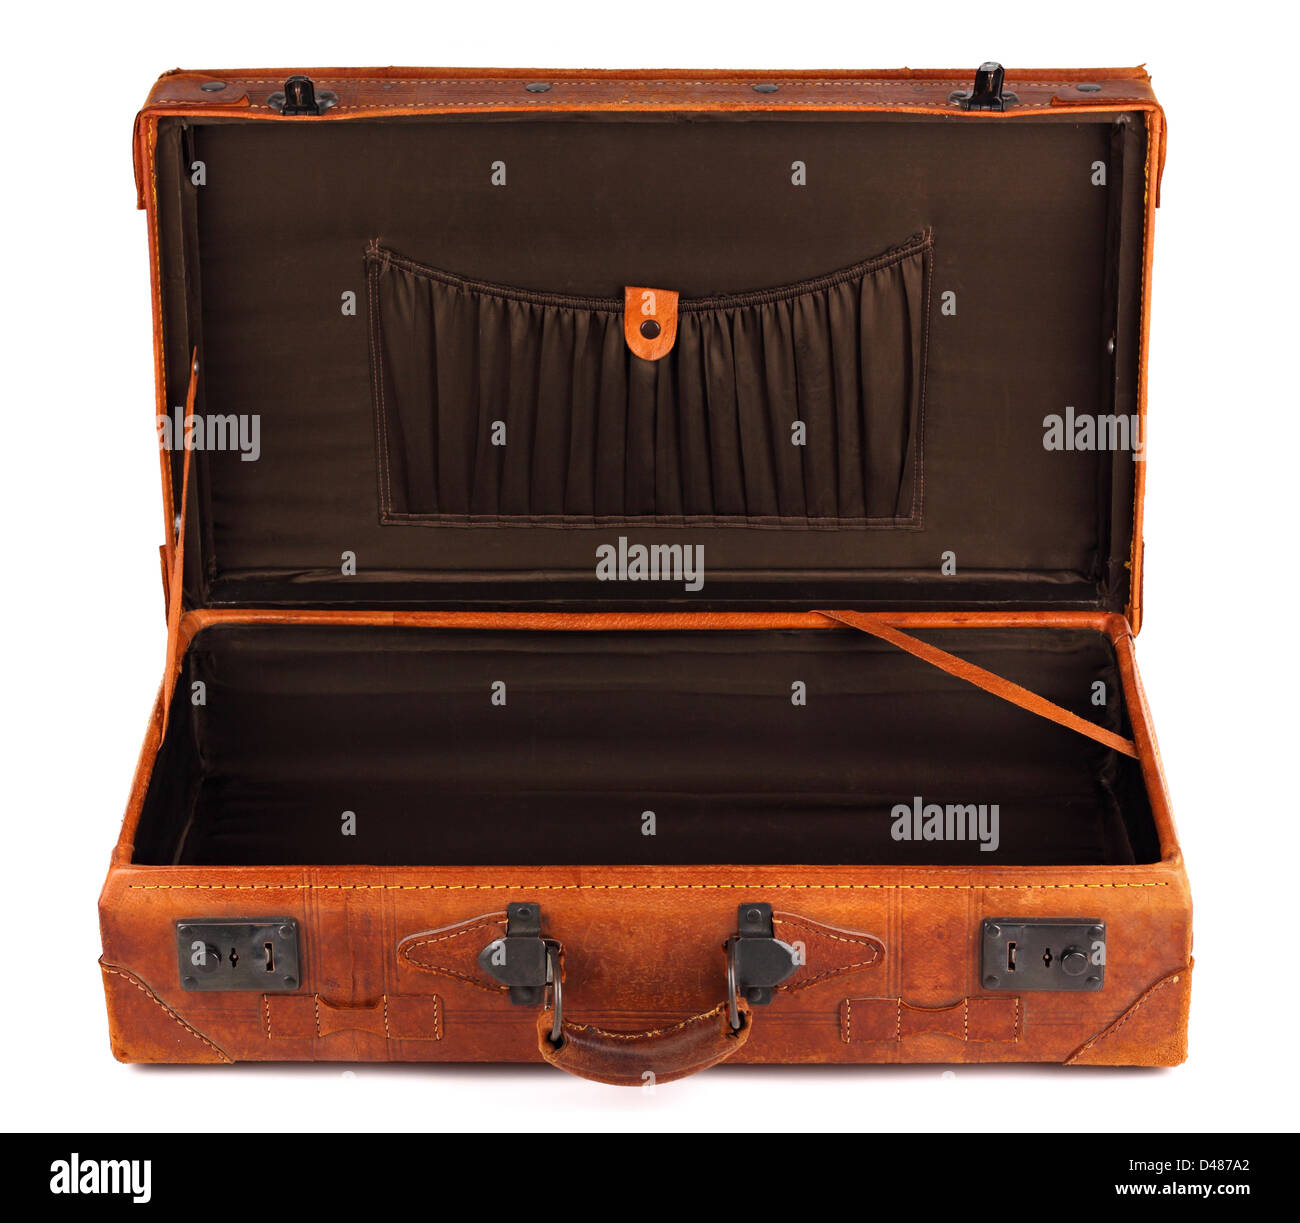 An old leather opened suitcase on white background Stock Photo